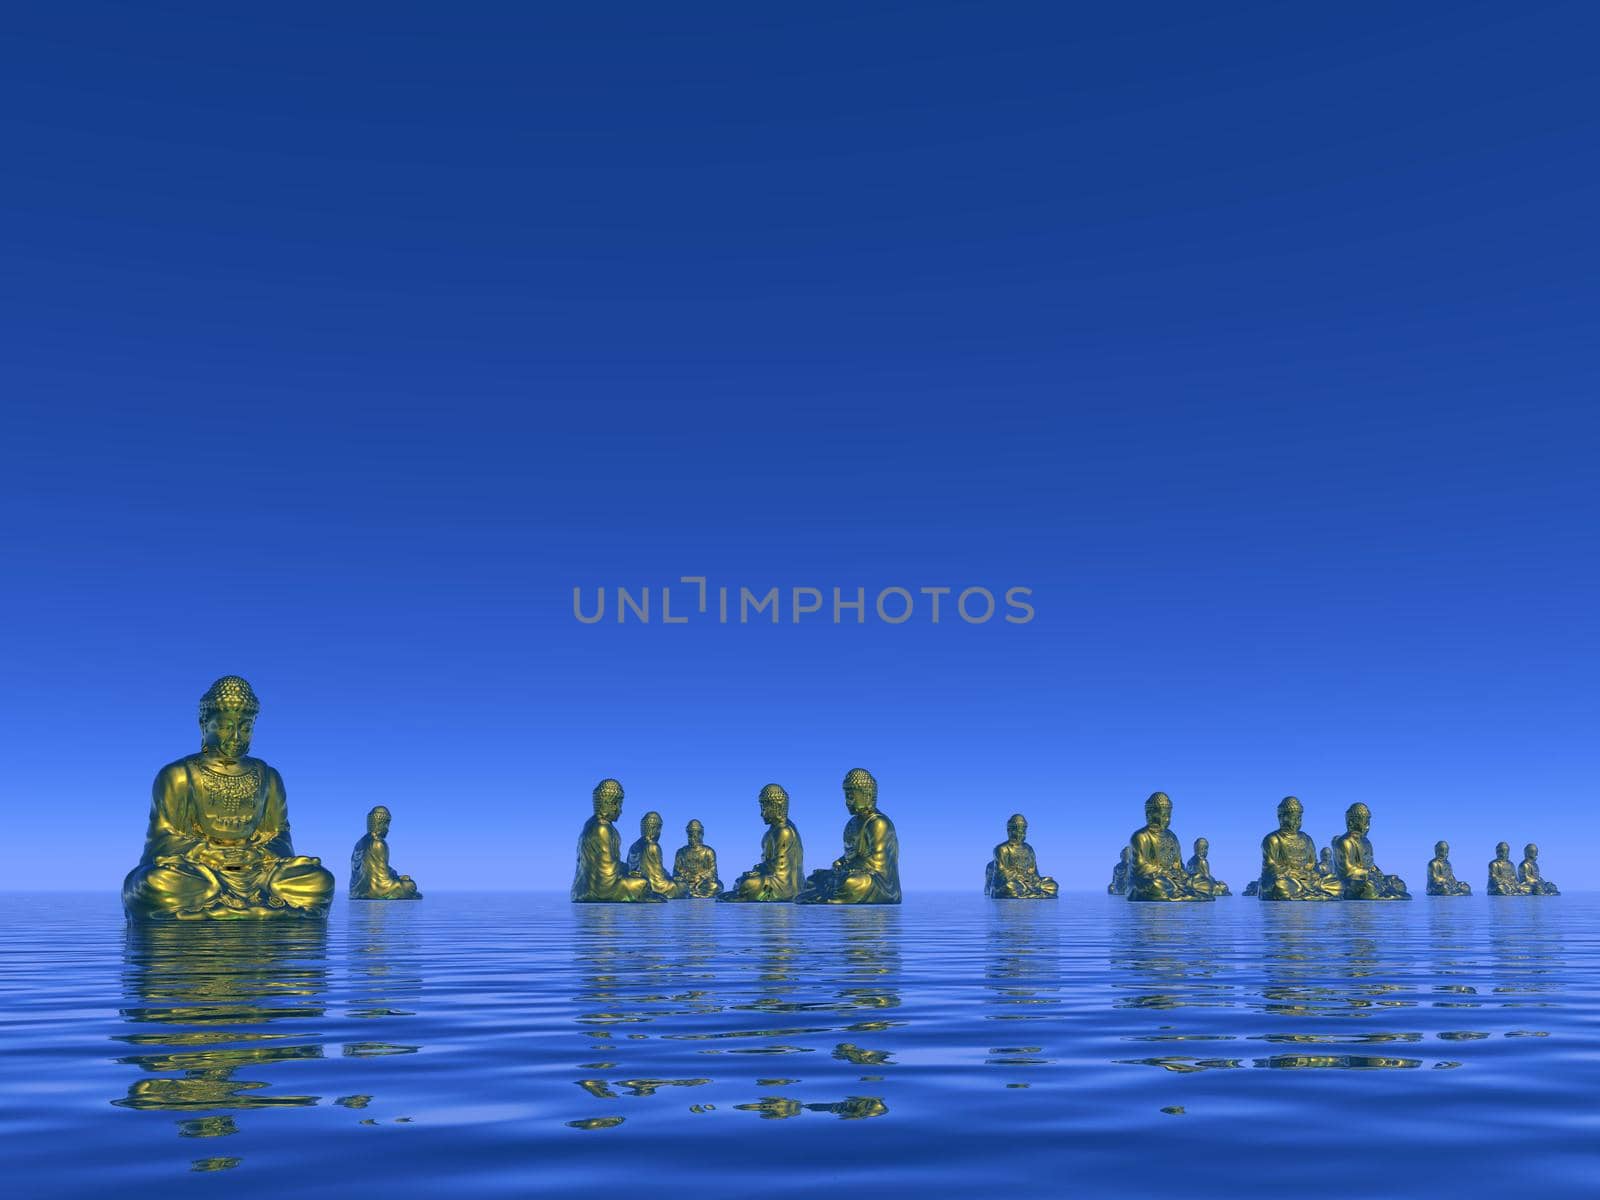 Many golden buddhas meditating on water by blue night